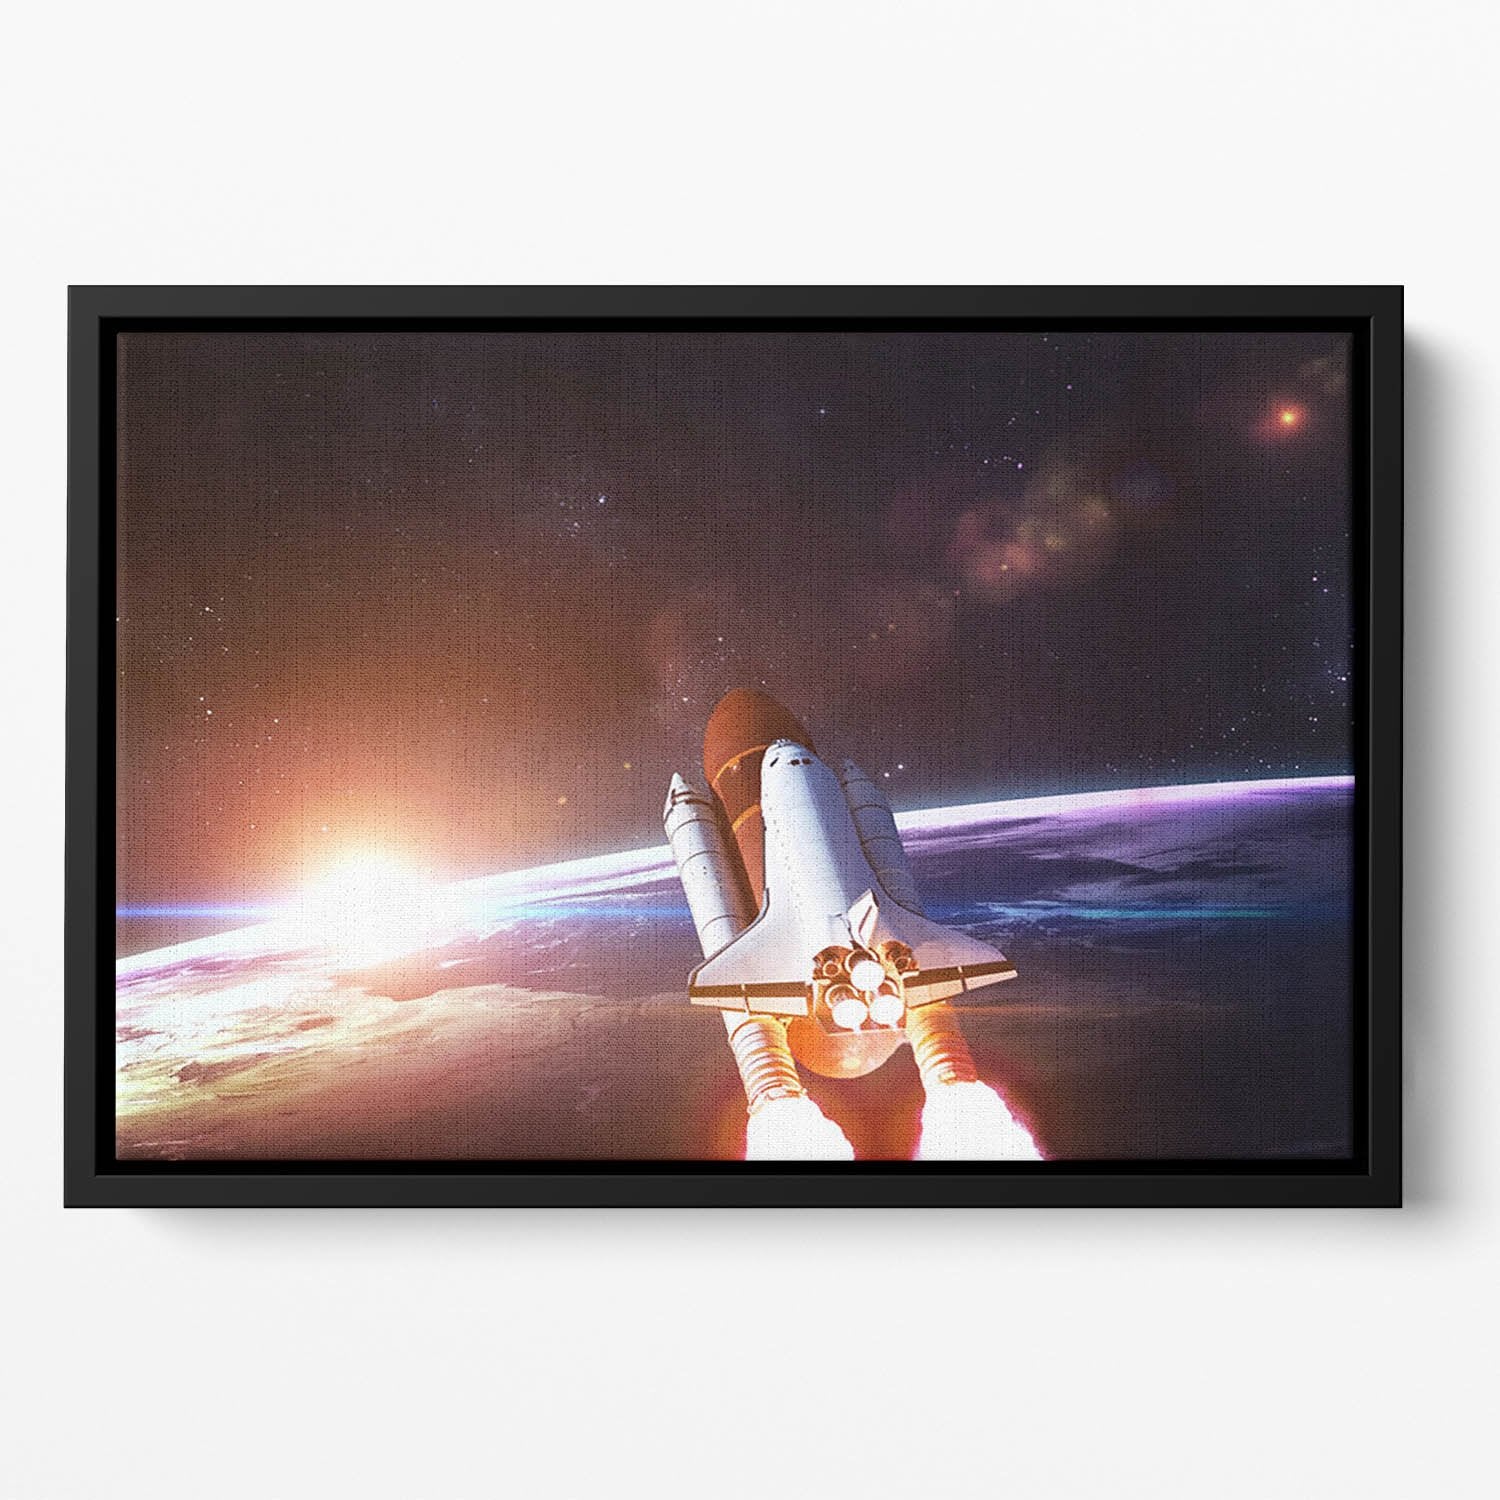 Space Shuttle over the Earth Floating Framed Canvas